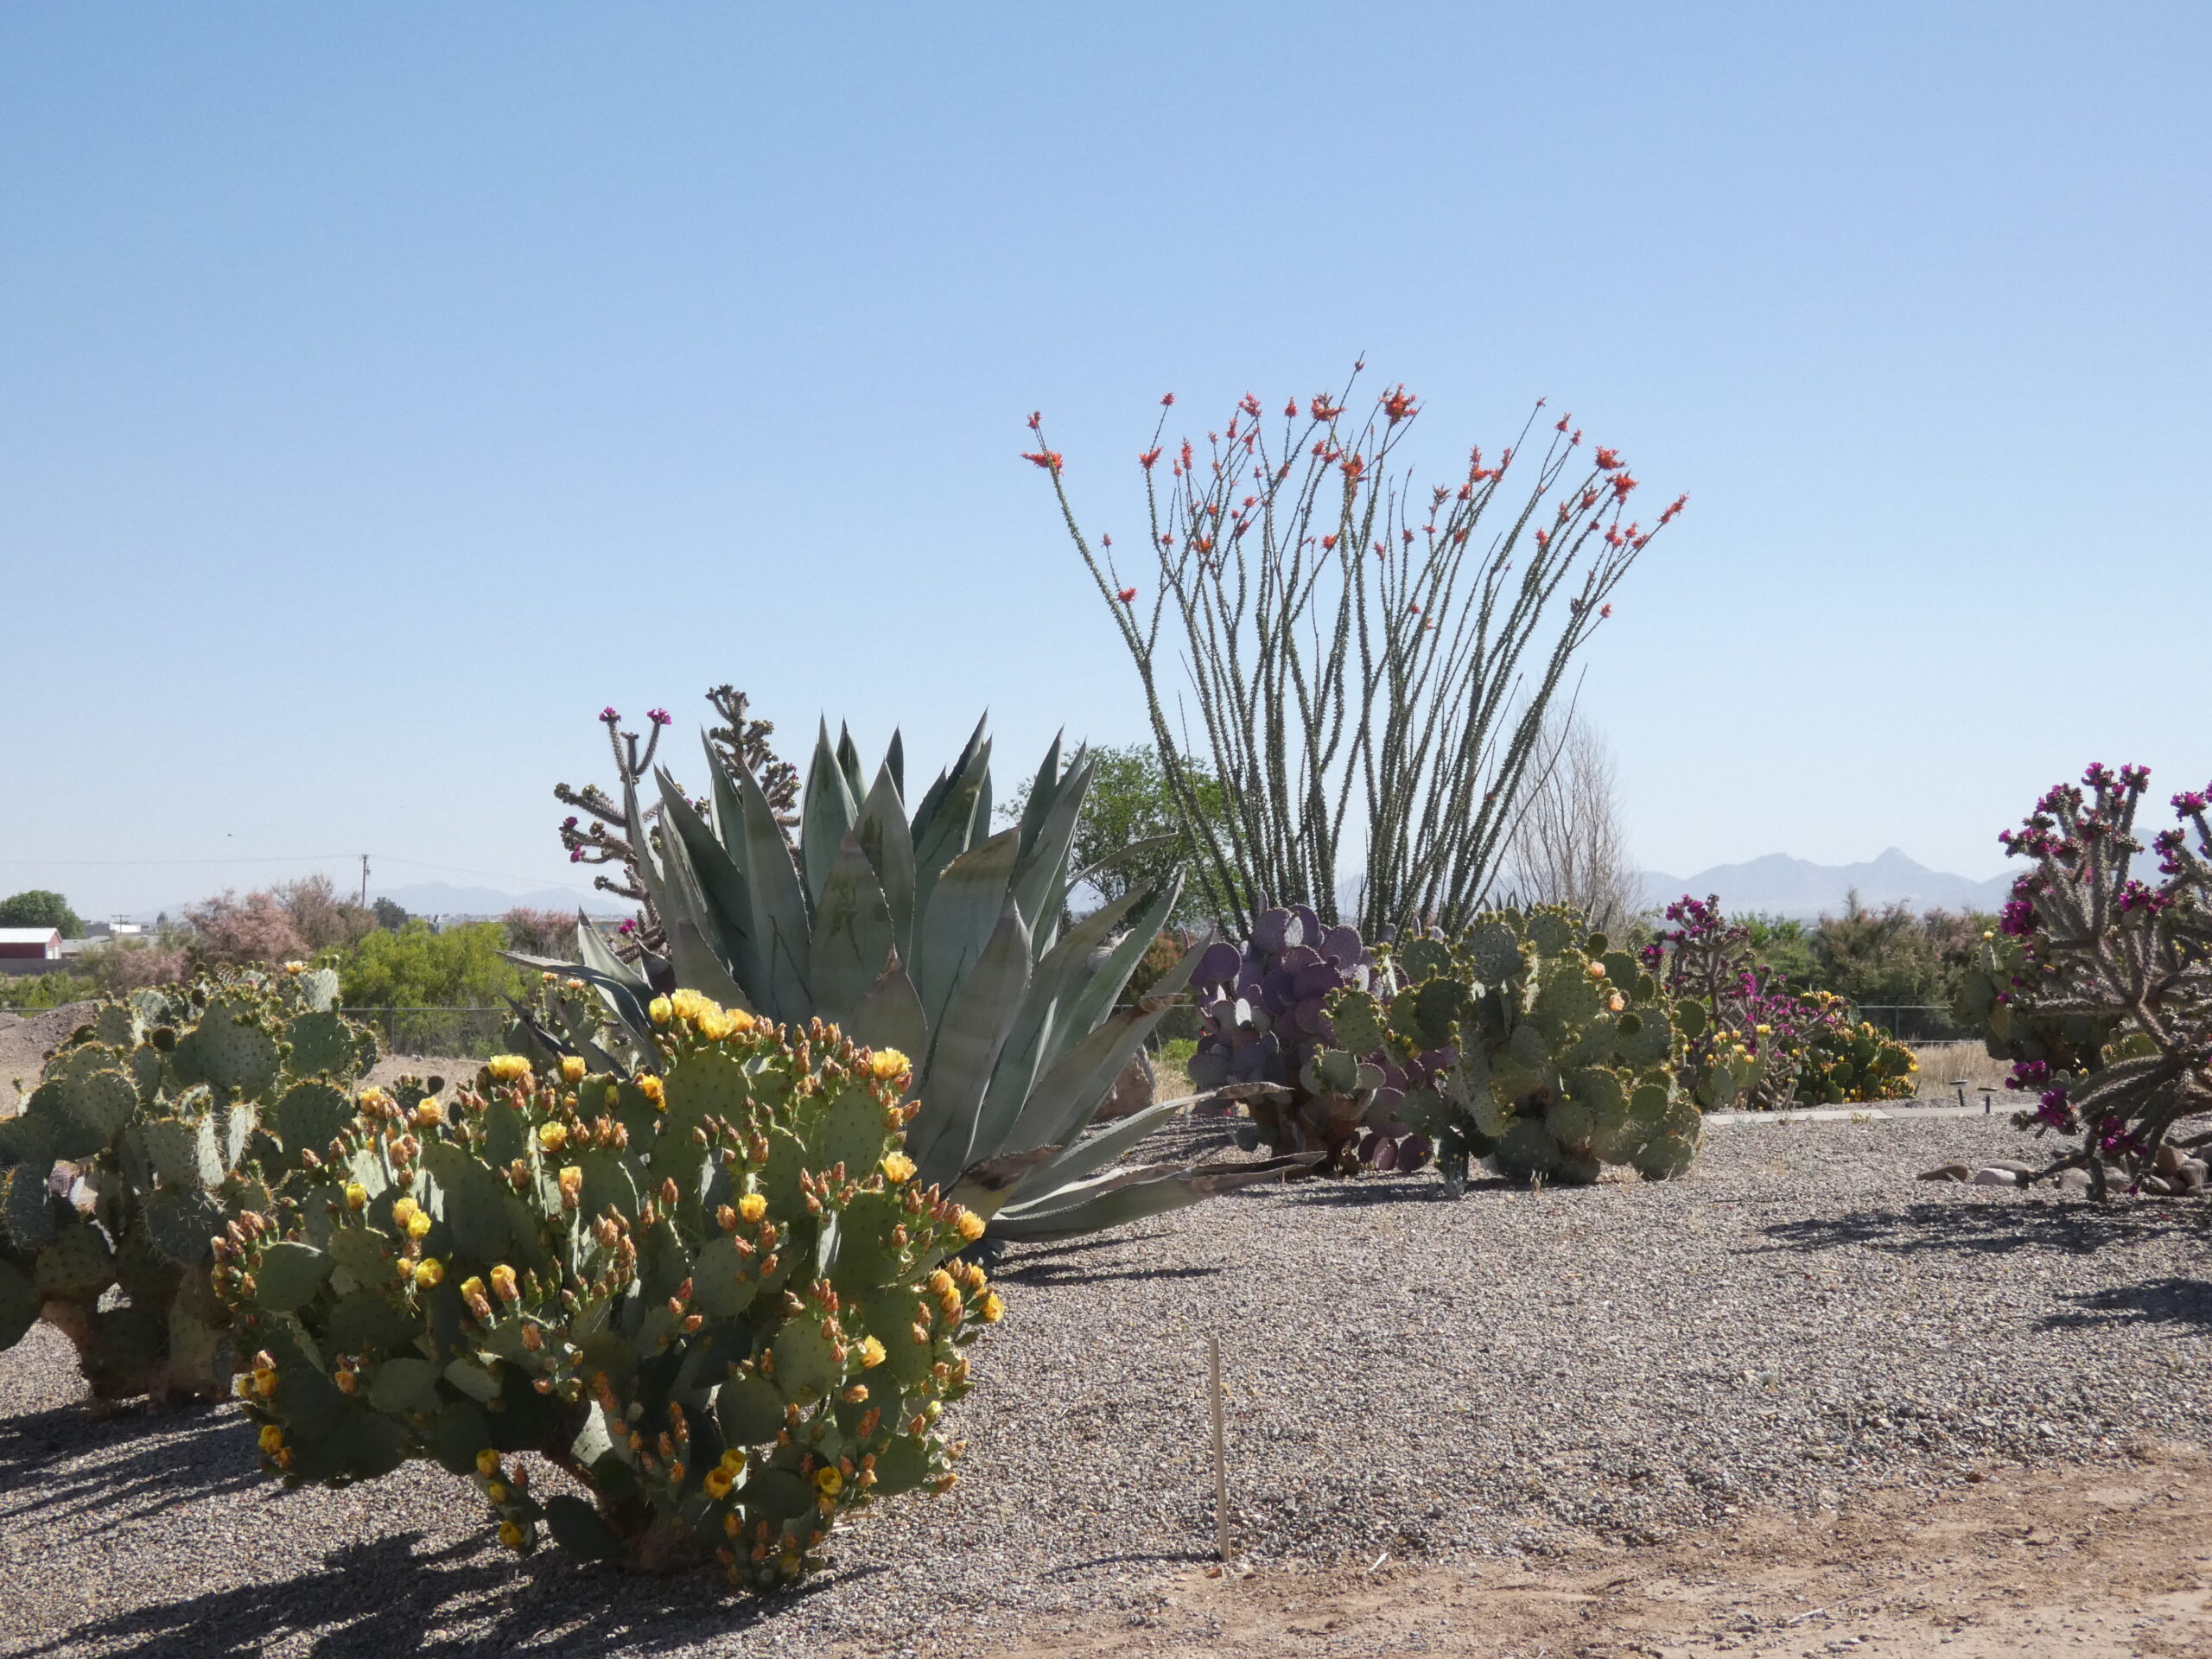 Some common desert plants of the Chihuahuan Desert include prickly pear cactus, ocotillo, and agave.